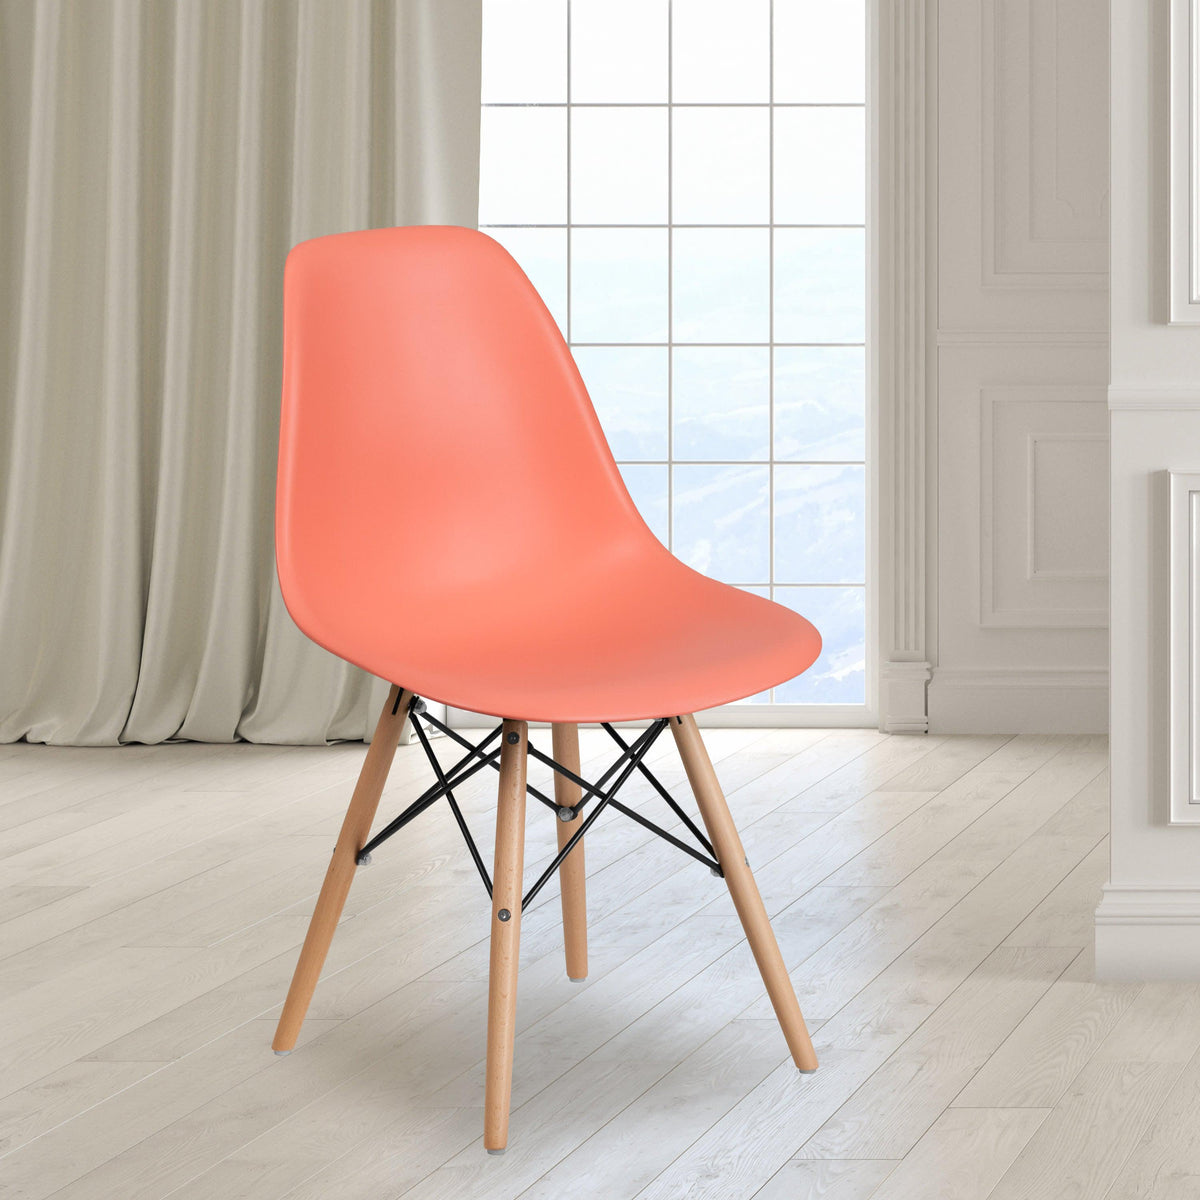 Peach |#| Peach Plastic Chair with Wooden Legs - Hospitality Seating - Side Chair